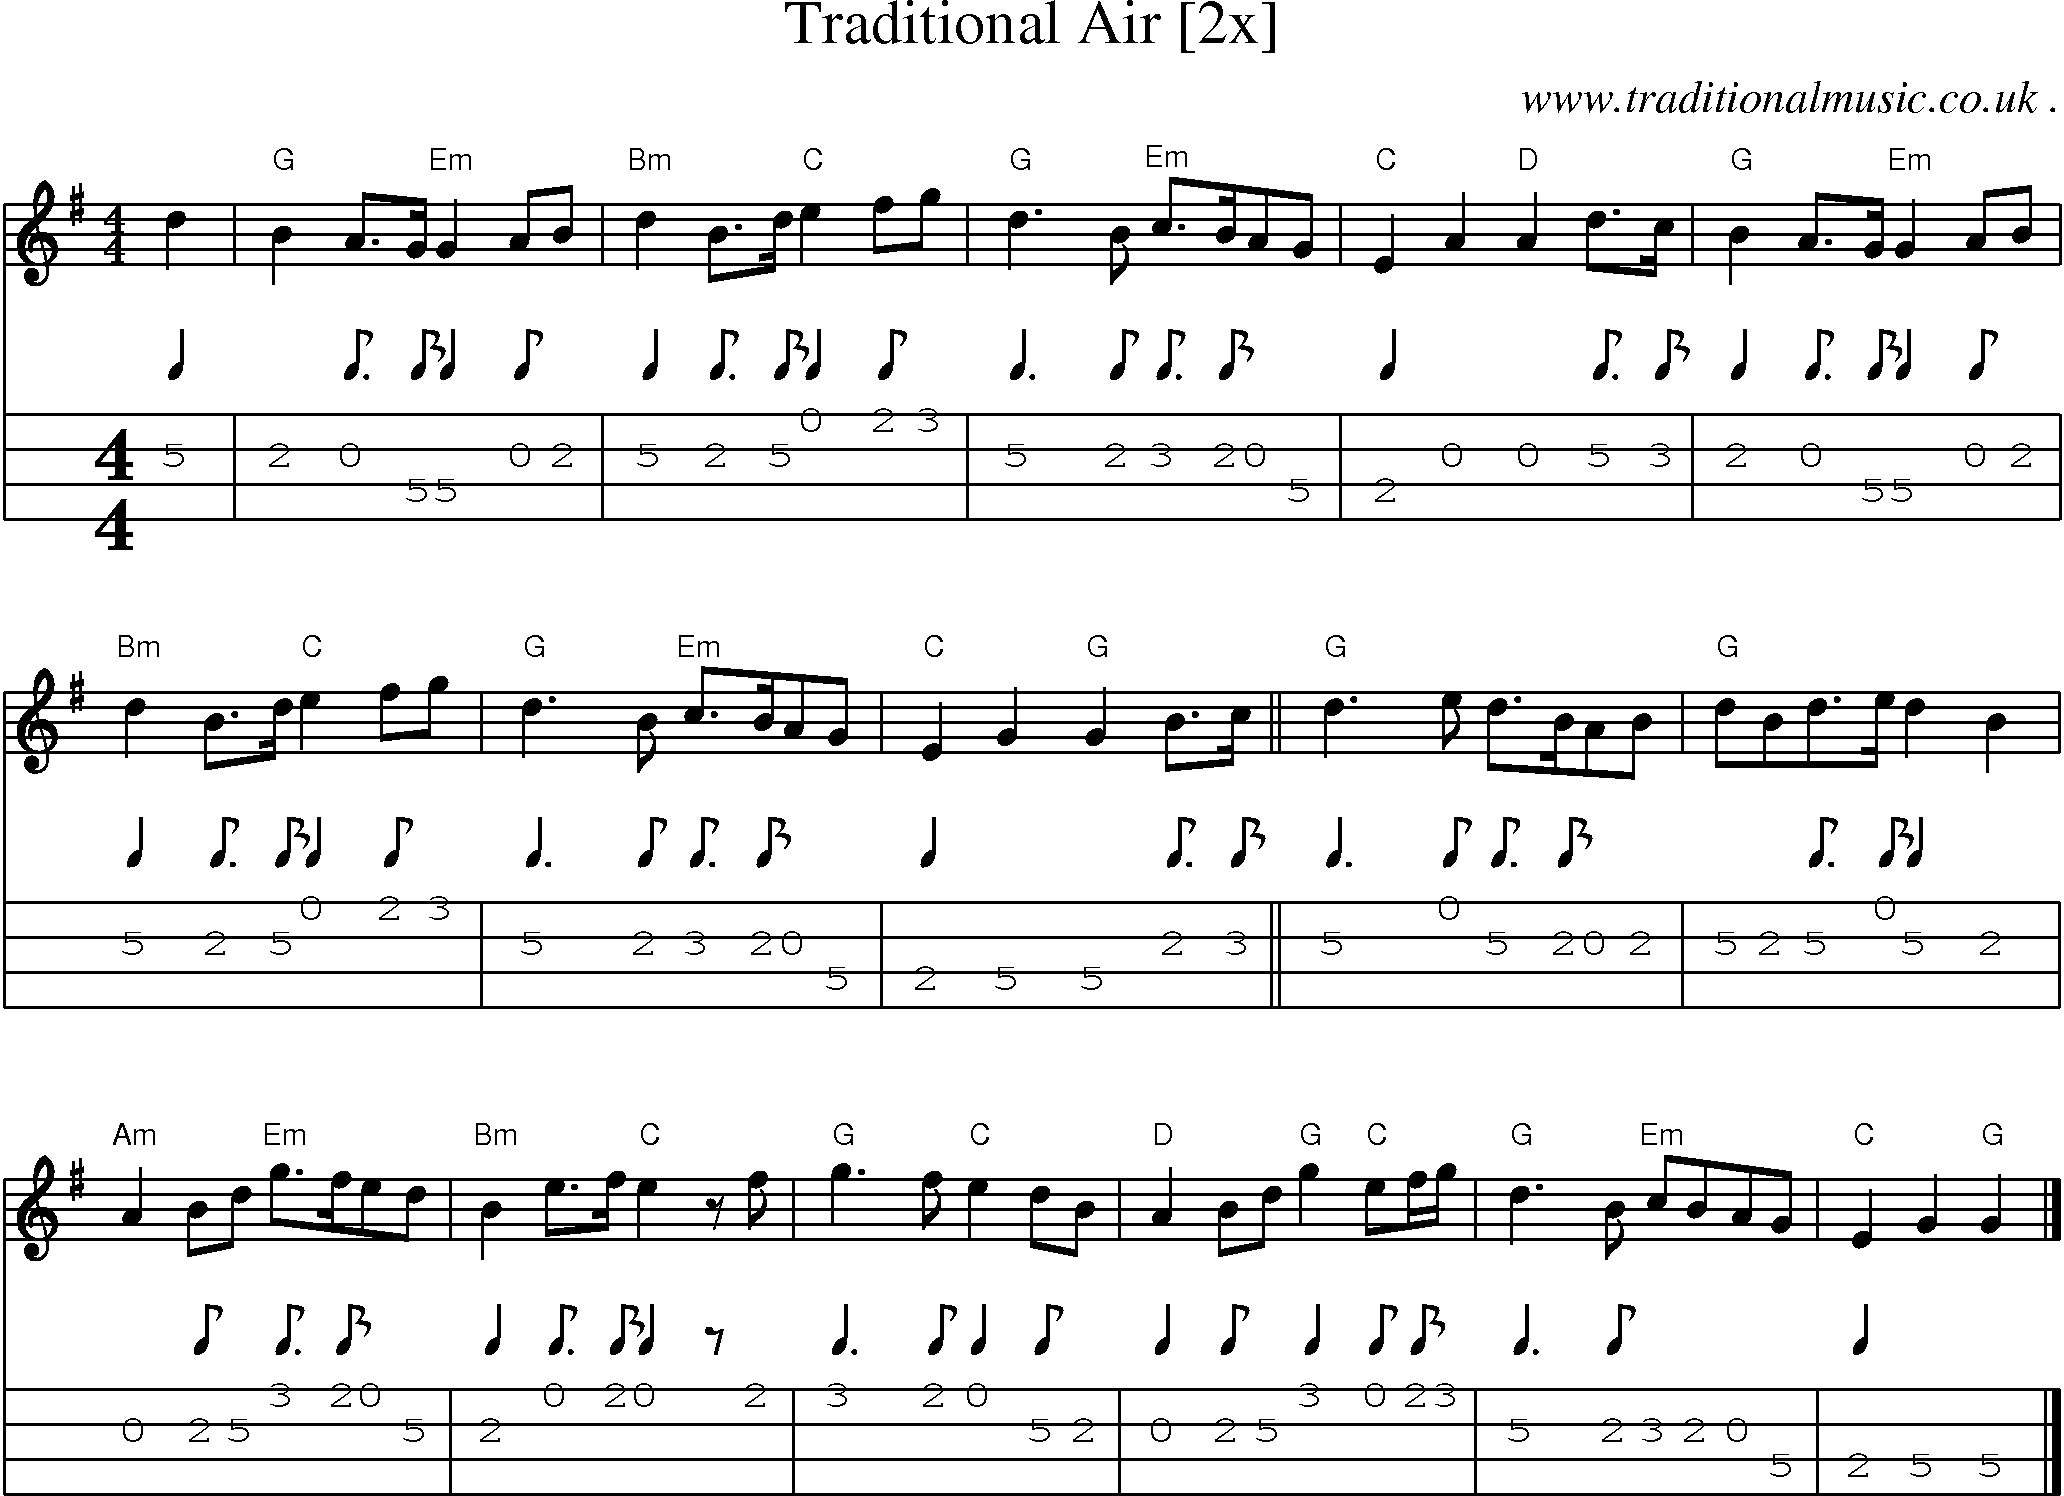 Sheet-music  score, Chords and Mandolin Tabs for Traditional Air [2x]